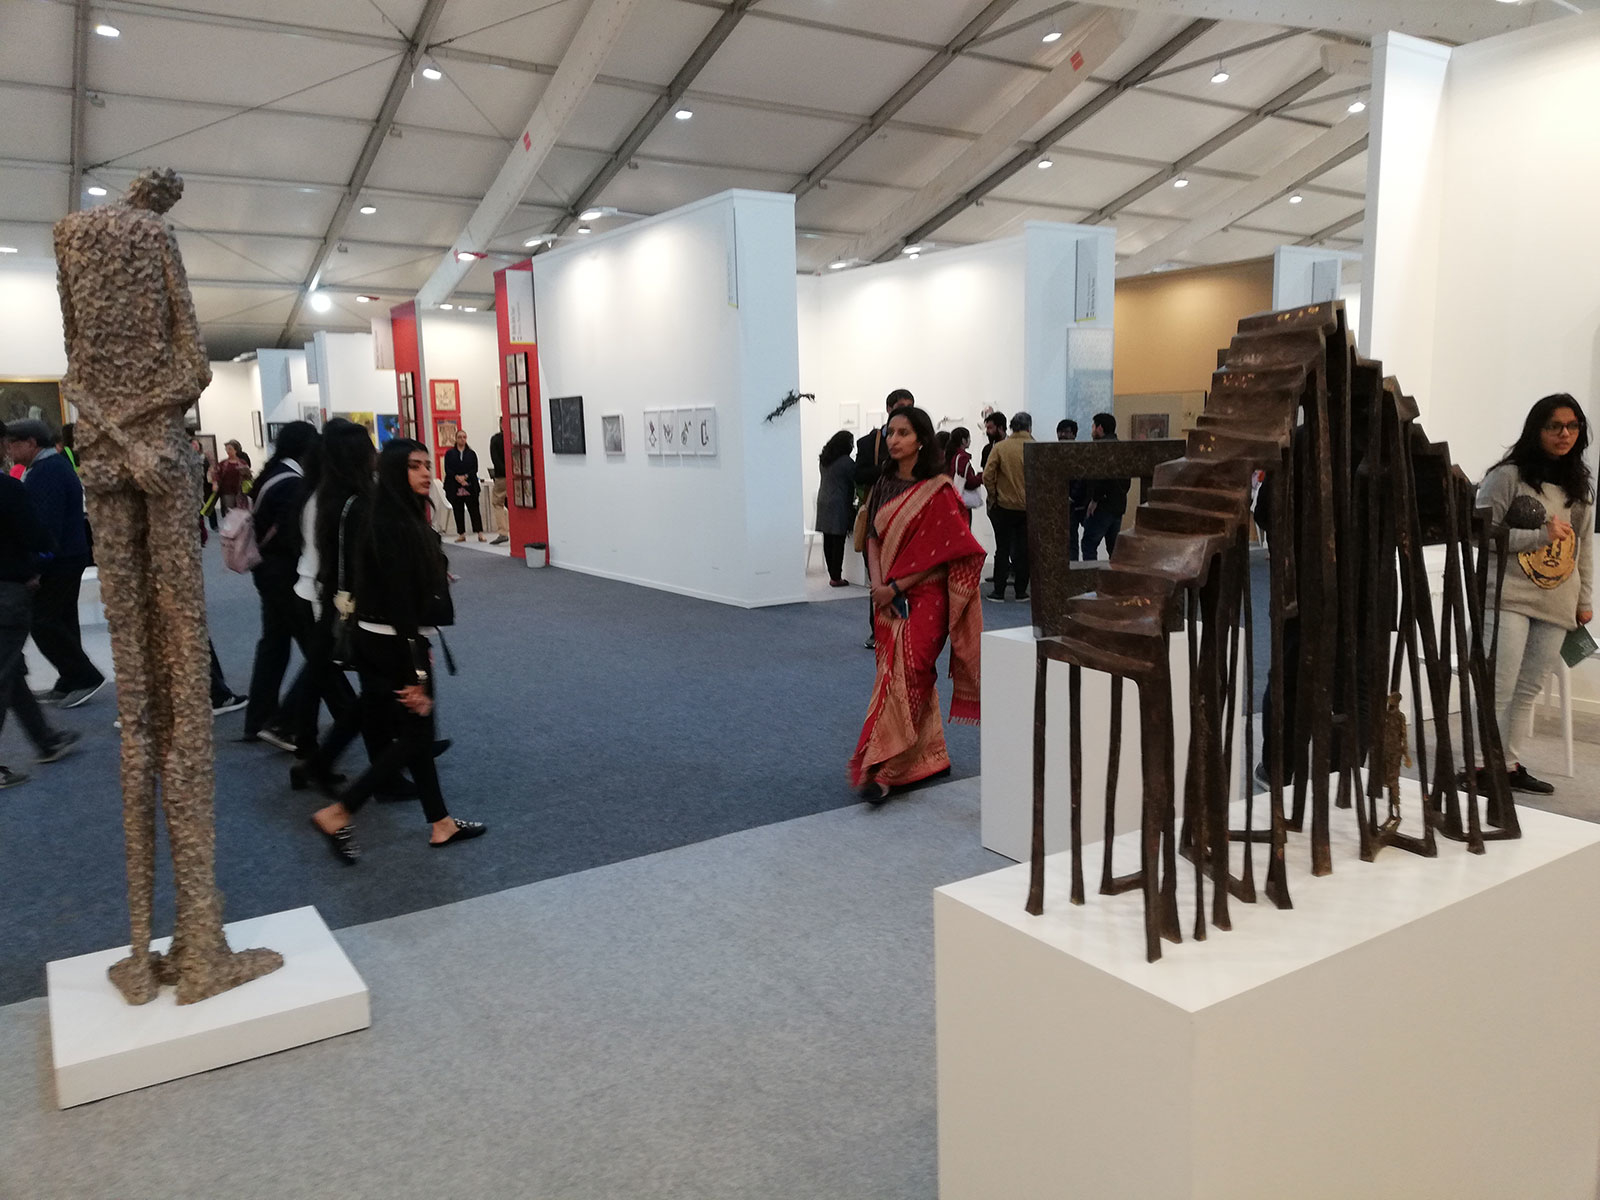 French sculptor Val - Valérie Goutard - with REDSEA Gallery at India Art Fair with Sculptureval